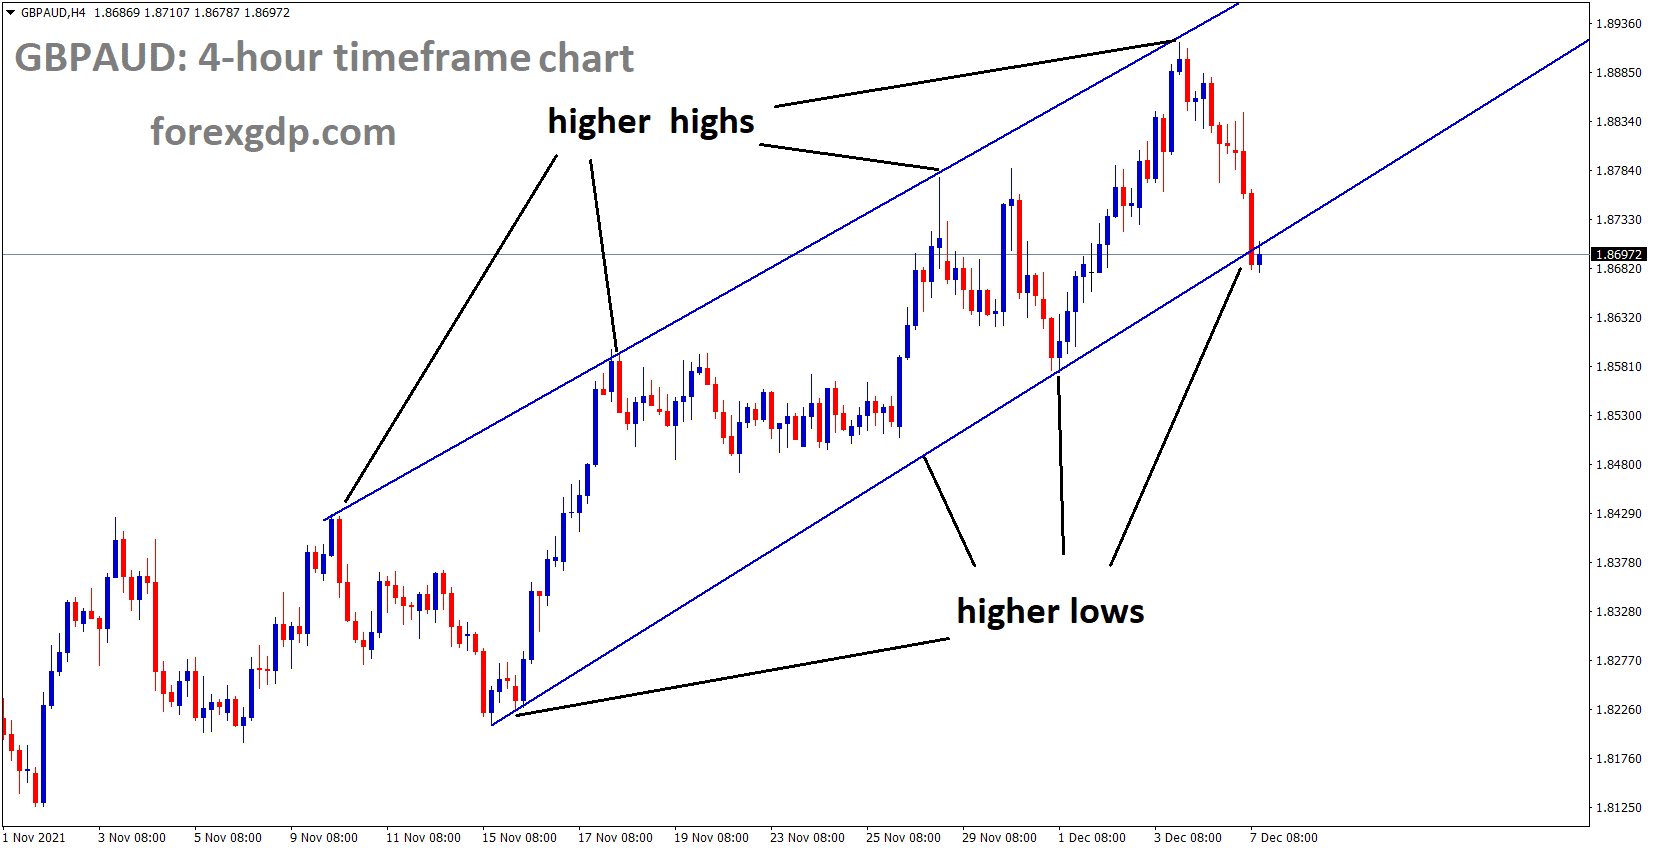 GBPAUD is moving in an Ascending channel and the market reached the higher low area of the channel